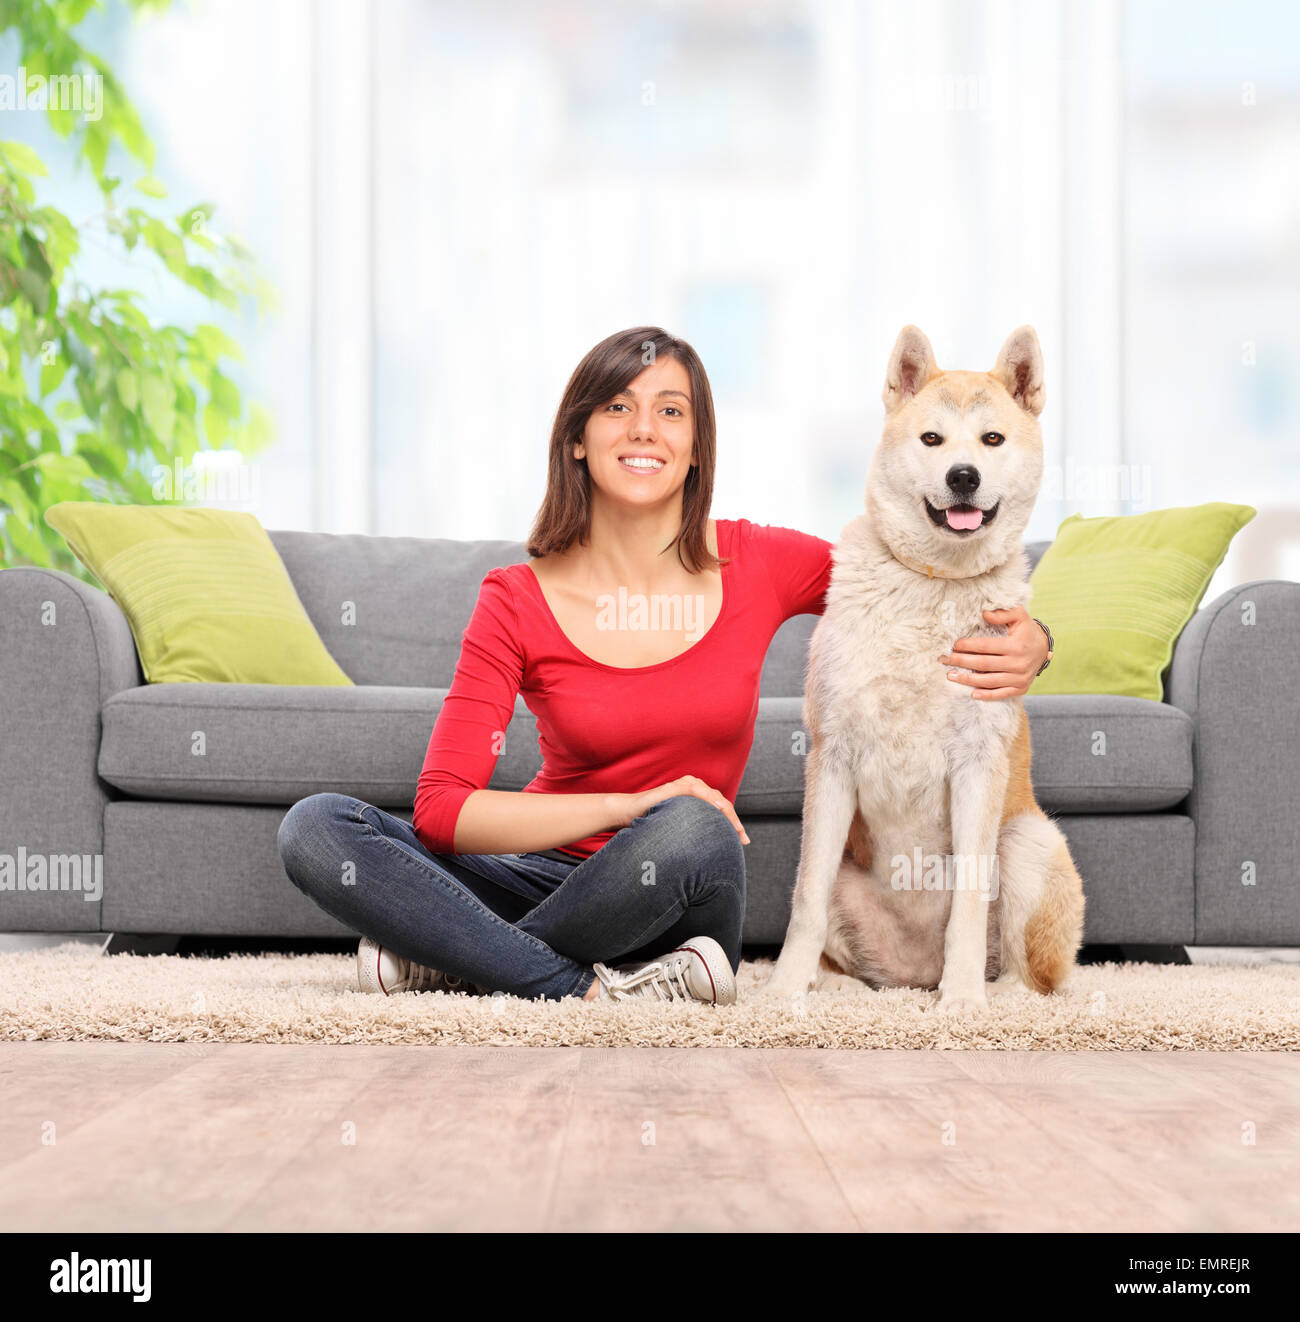 Young woman sitting on the floor with her Akita pet dog and looking at the camera in front of a gray sofa at home Stock Photo